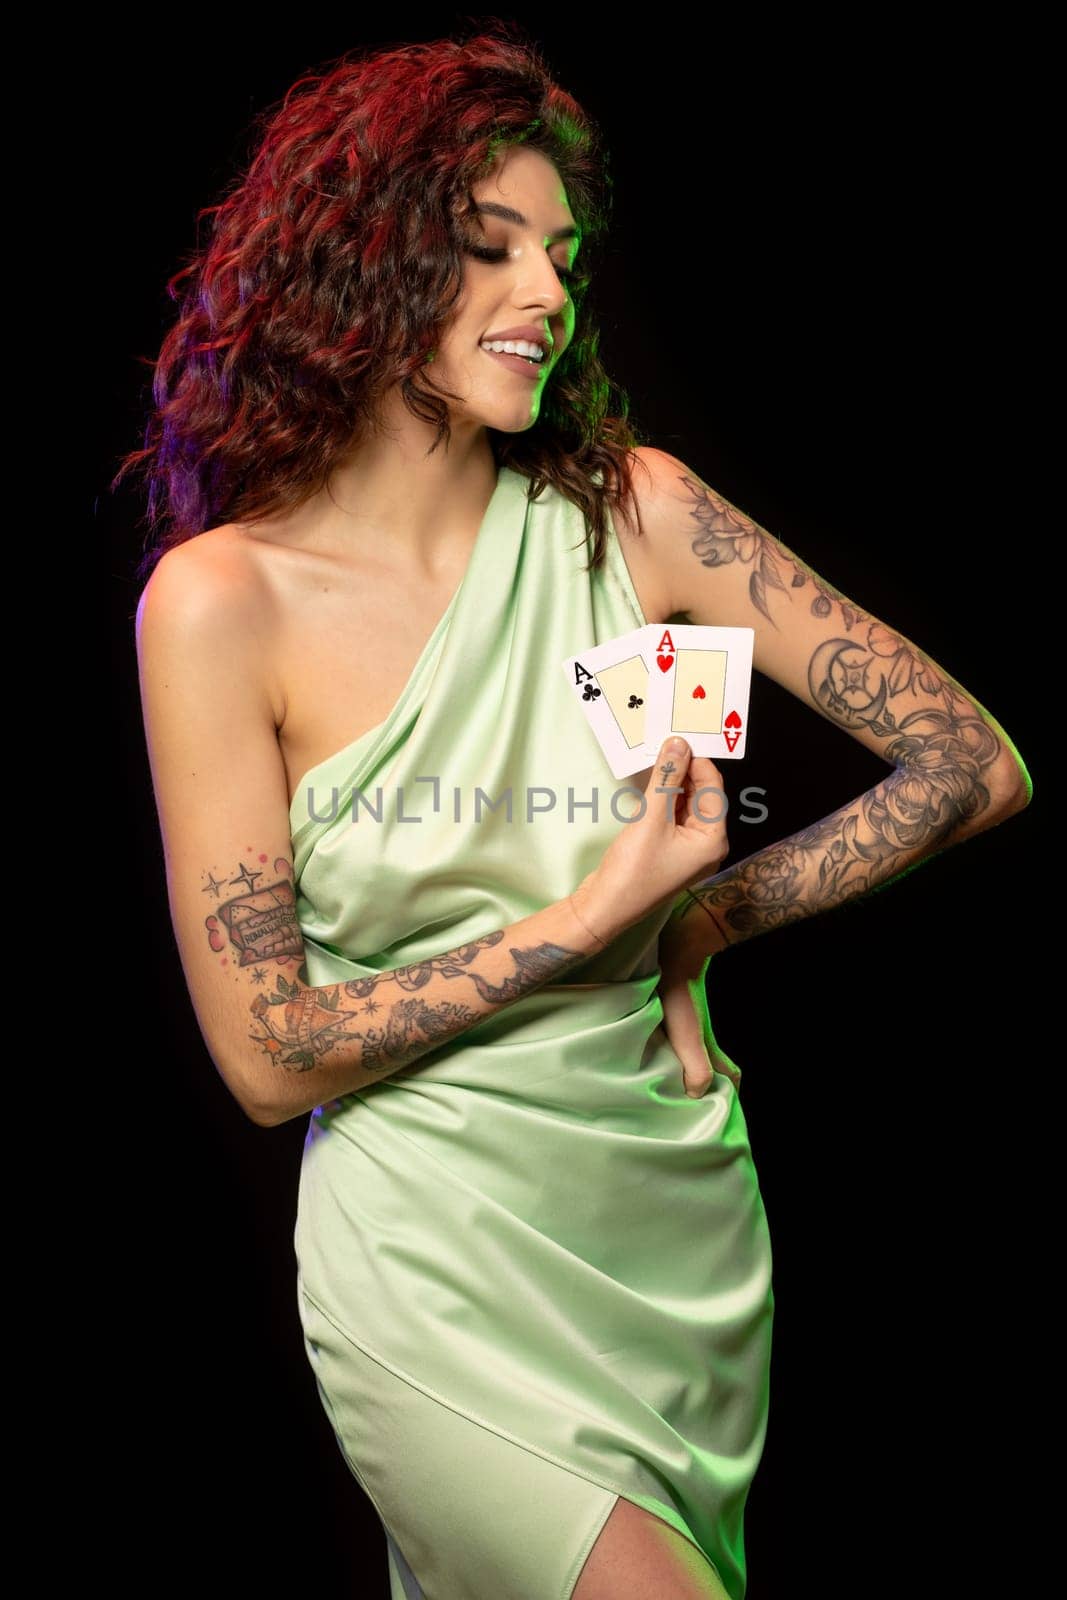 Successful young female poker player holding winning pair of aces by nazarovsergey